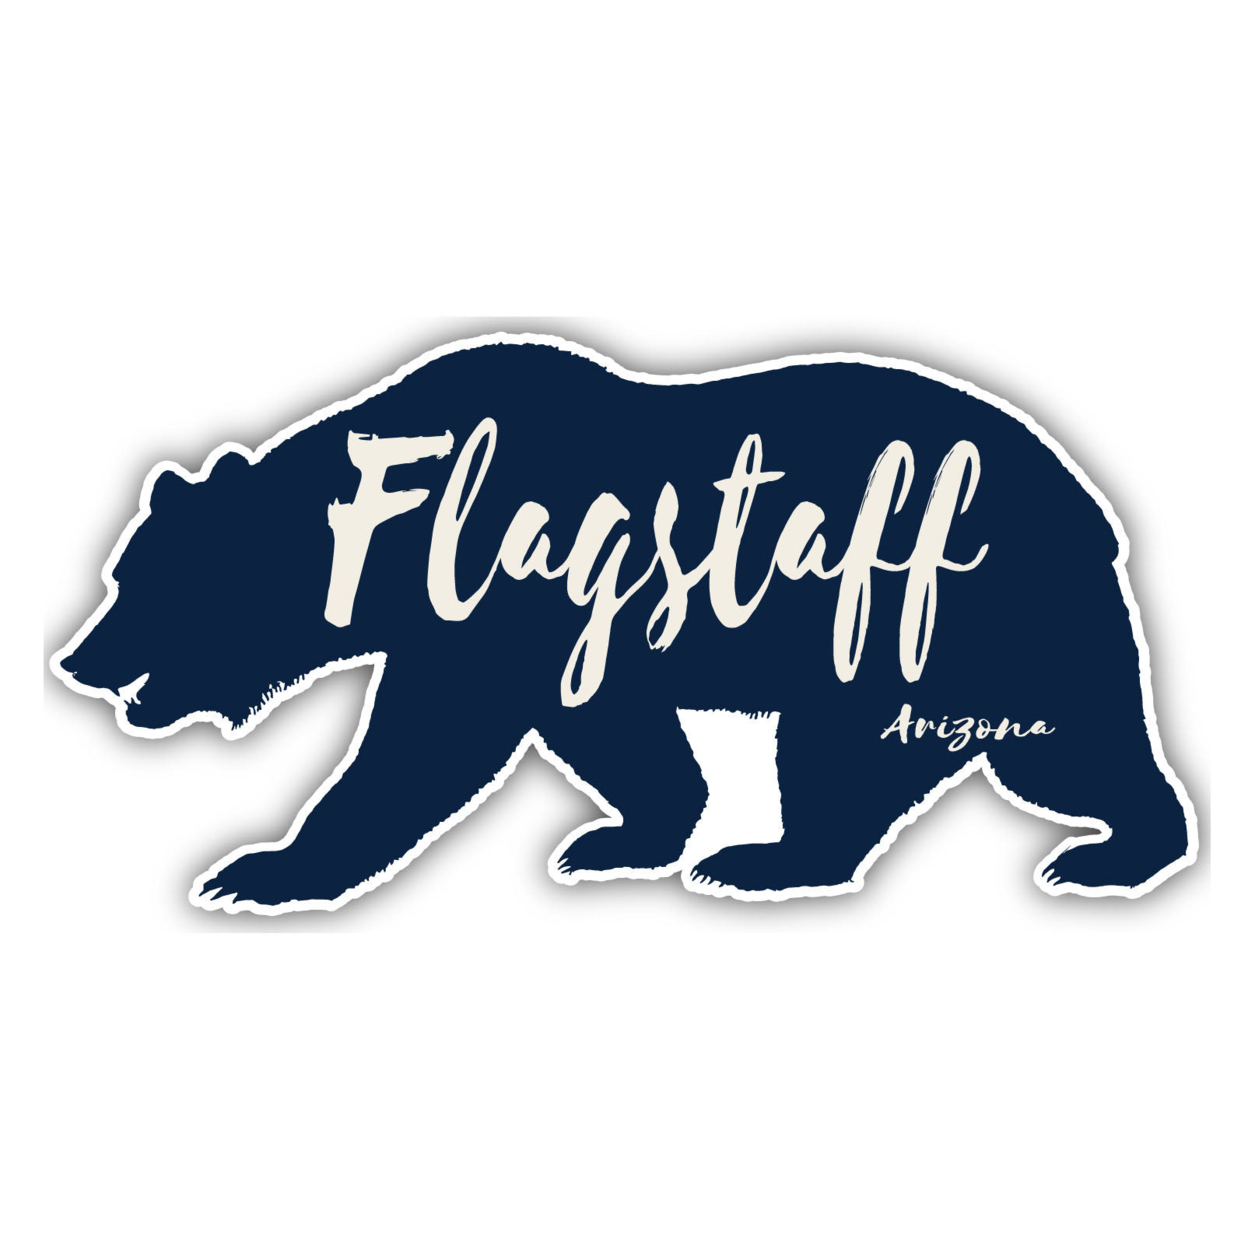 Flagstaff Arizona Souvenir Decorative Stickers (Choose Theme And Size) - 4-Pack, 8-Inch, Tent